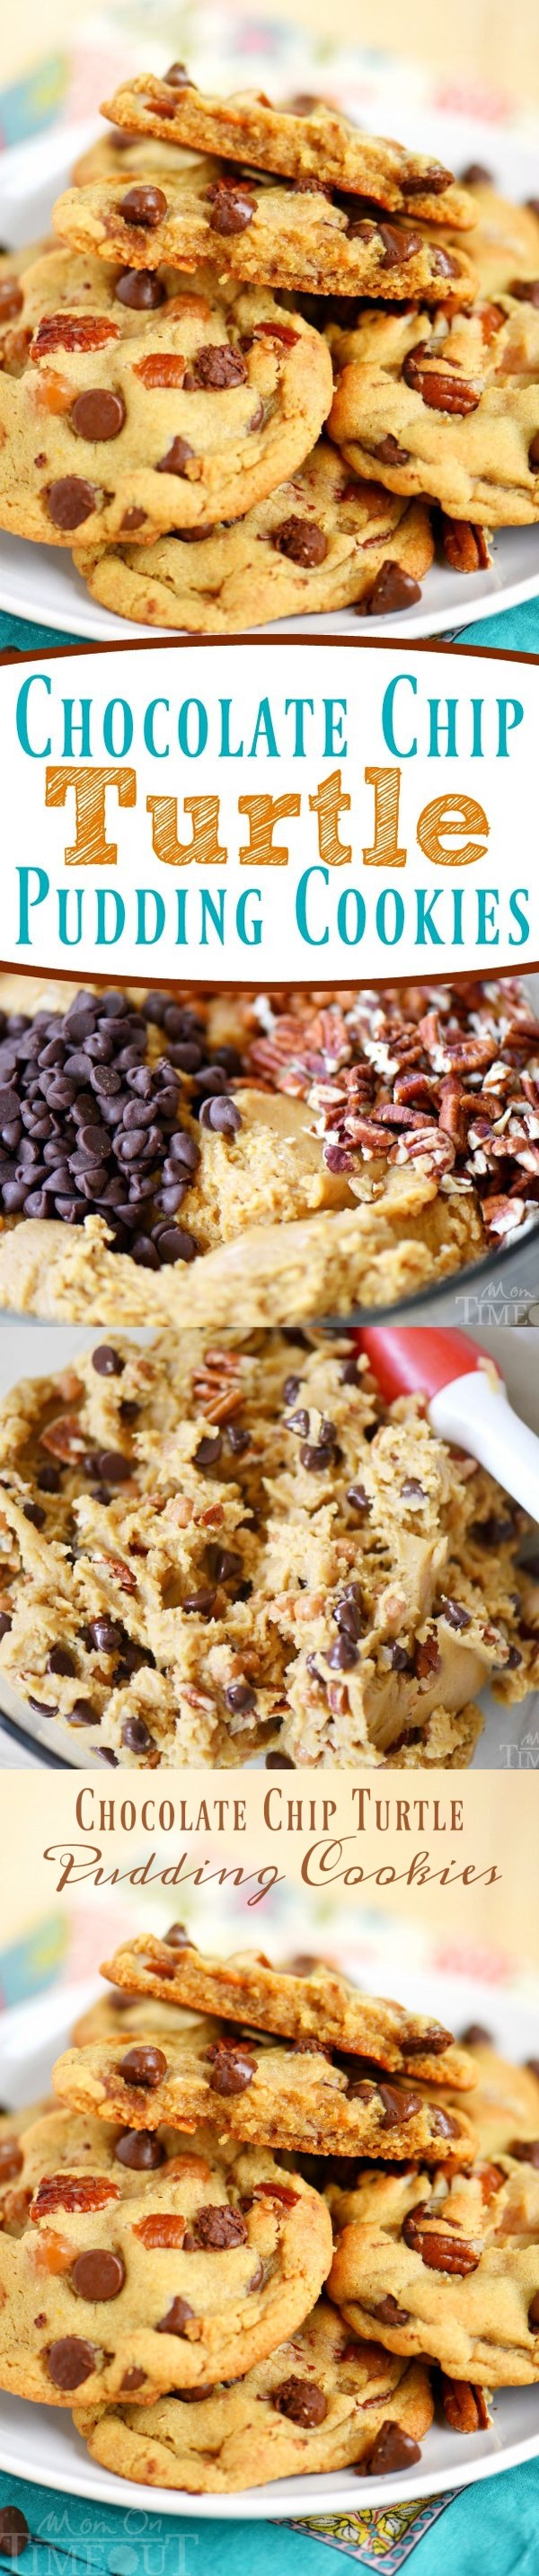 Chocolate Chip Turtle Pudding Cookies